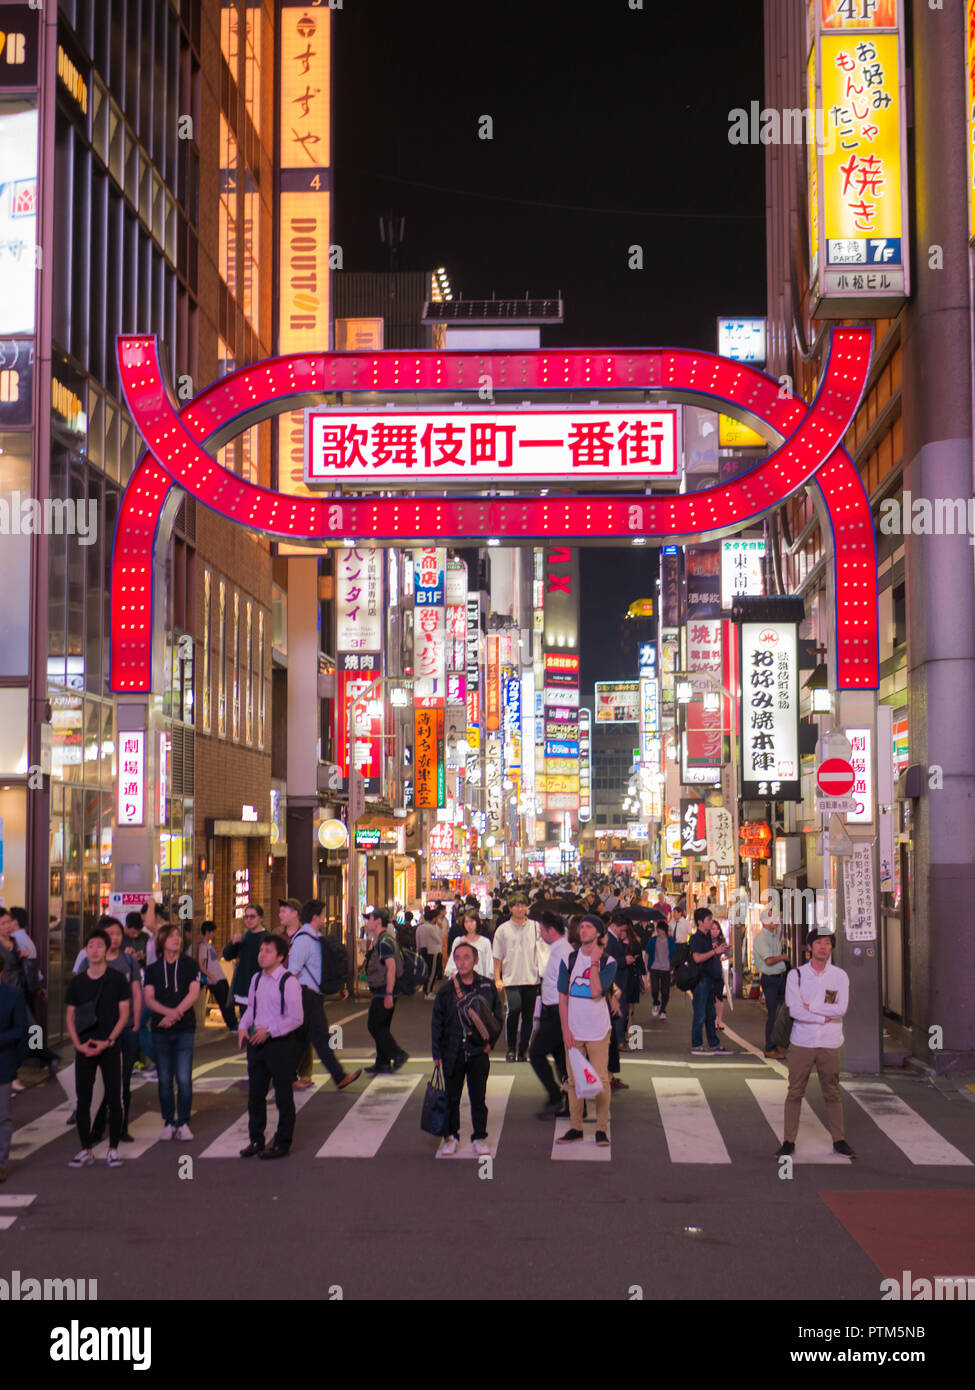 Tokyo, Japan. September 11, 2018. Crowds pass through Kabukicho in the Shinjuku district. The area is an entertainment and red-light district. Stock Photo